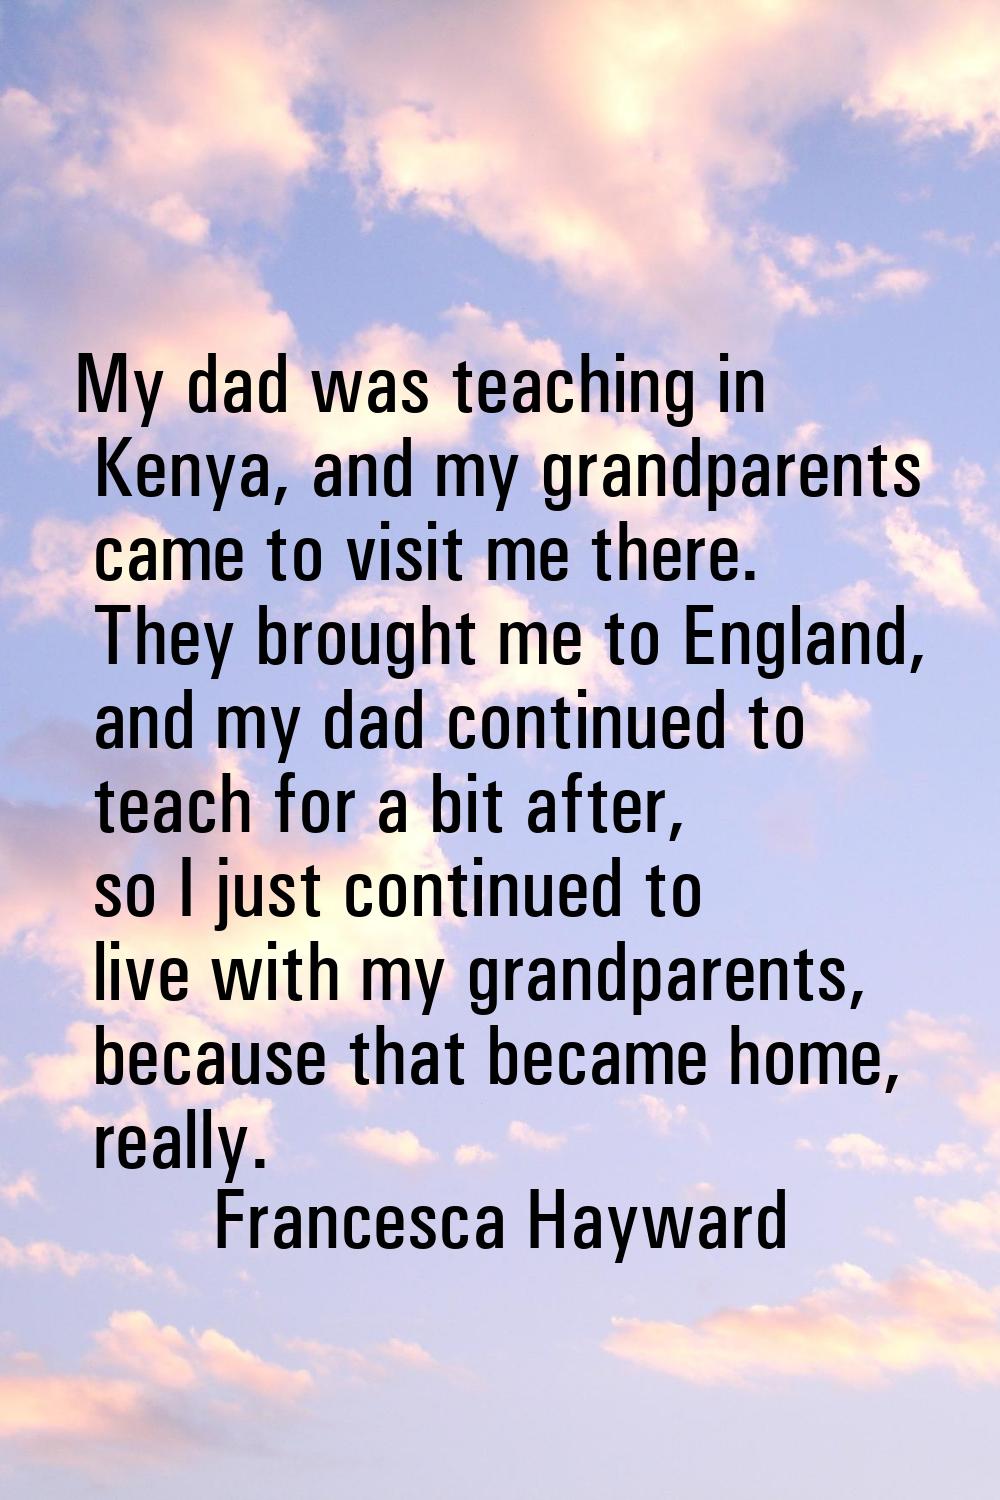 My dad was teaching in Kenya, and my grandparents came to visit me there. They brought me to Englan